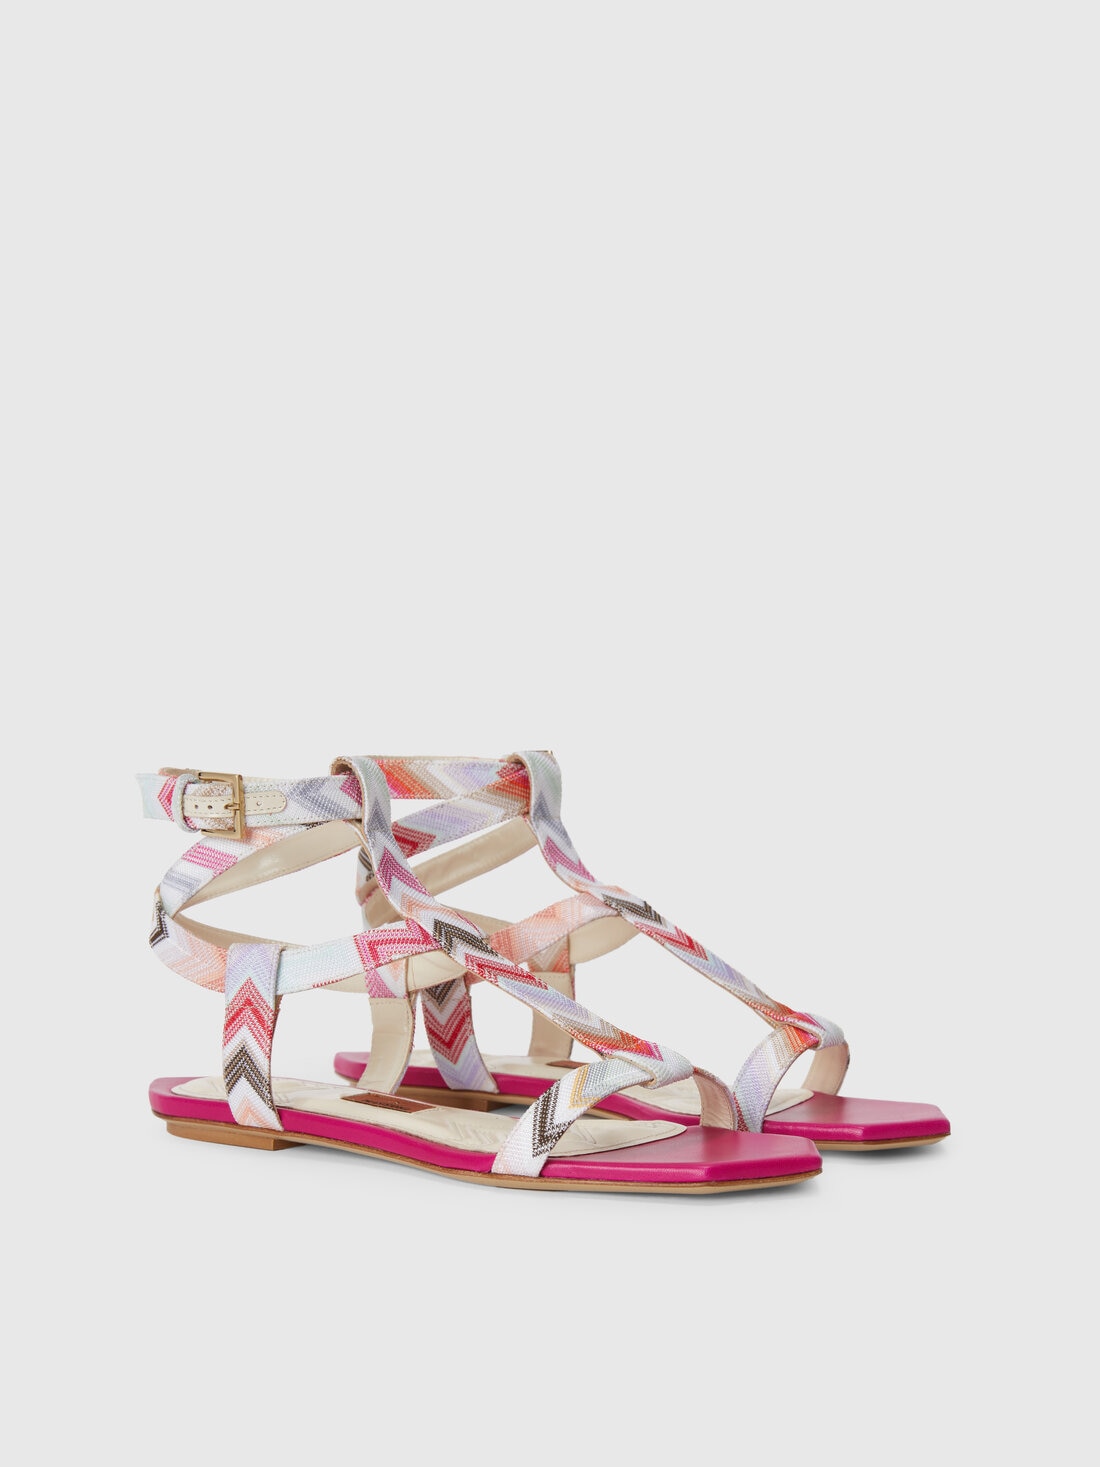 Low sandals in zigzag fabric, Pink   - LS24SY02BV00FYS30DQ - 1